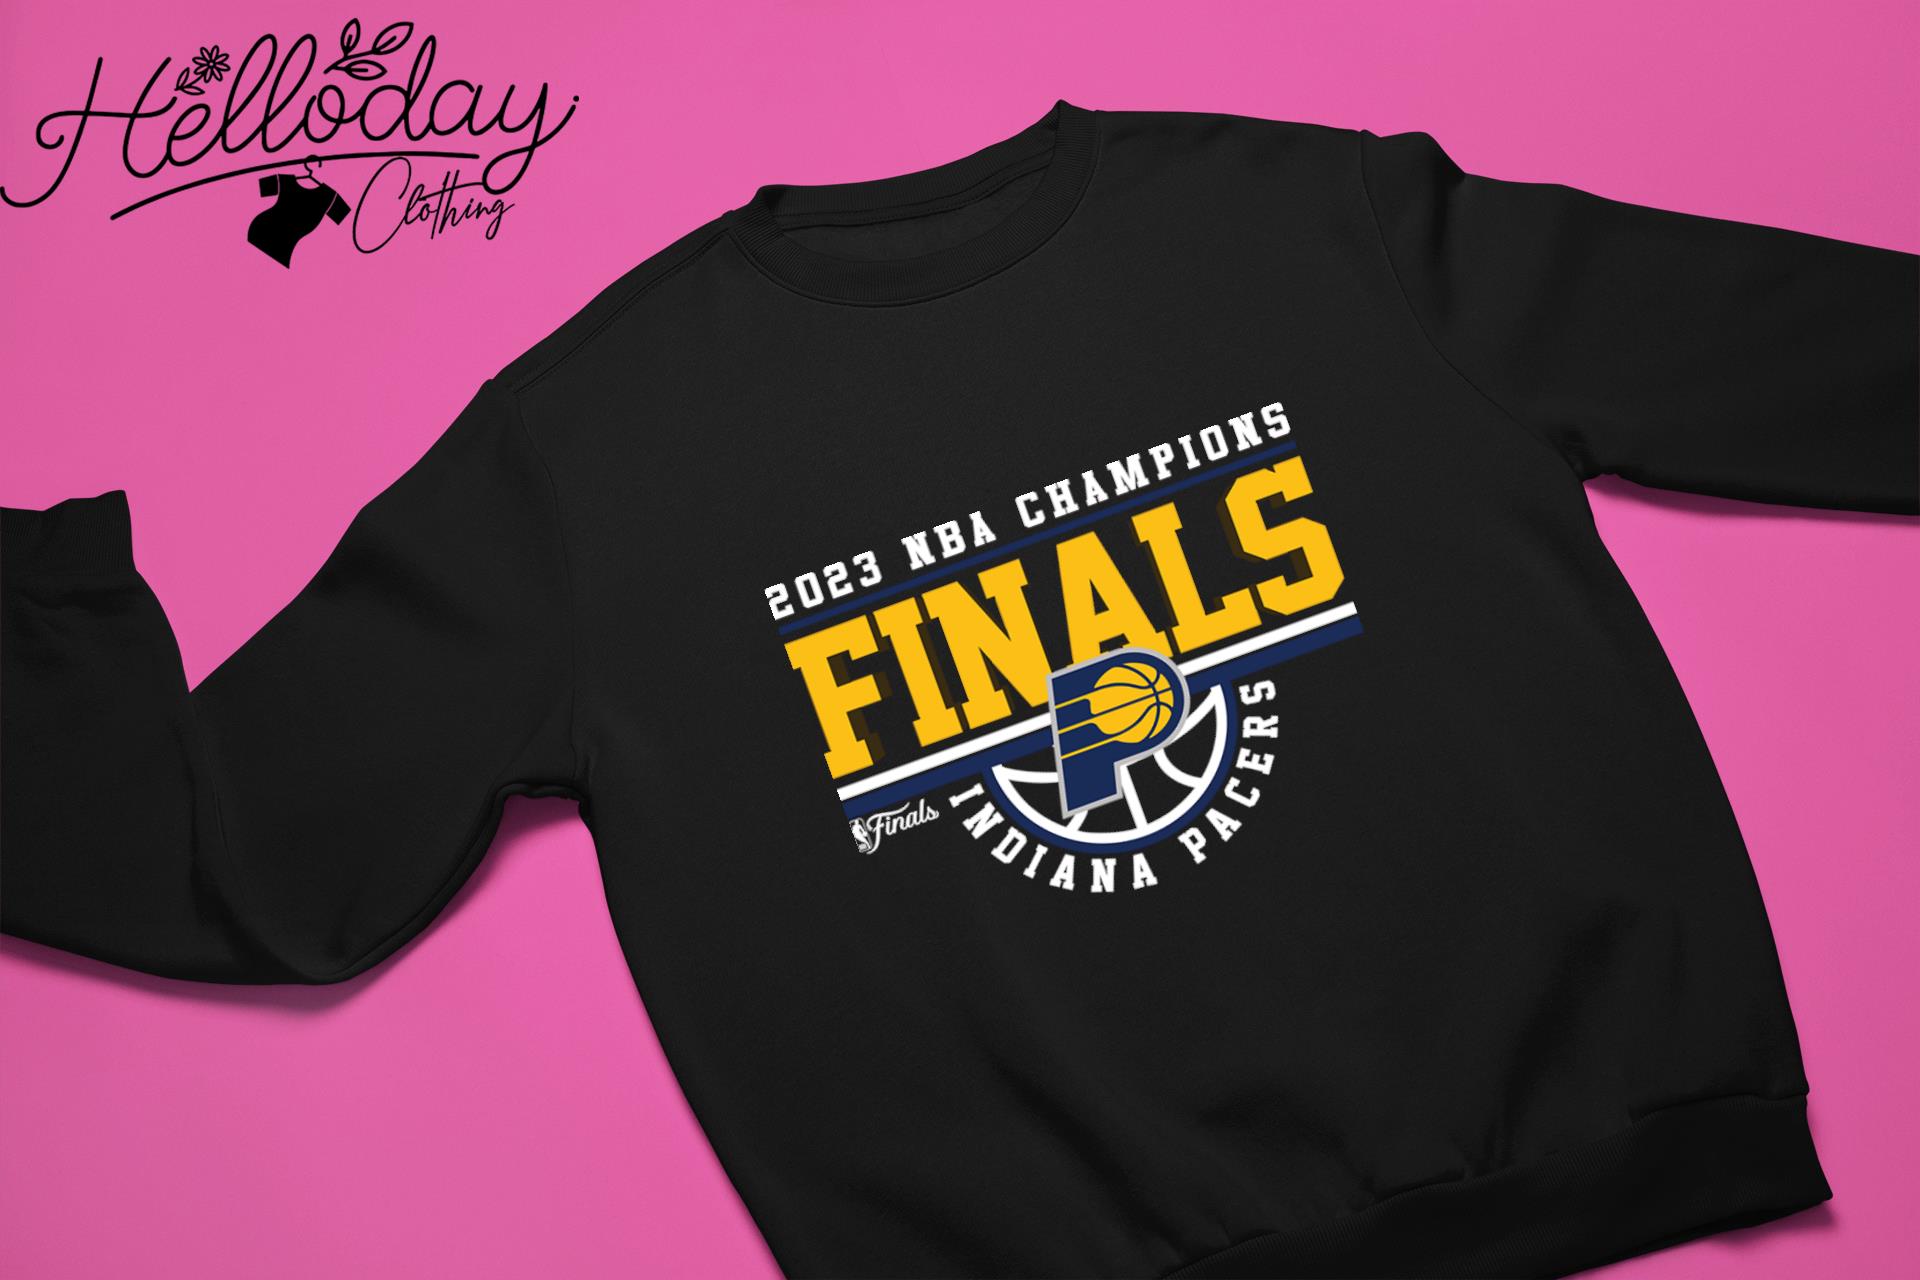 2023 NCA Champions Final Indiana Pacers t-shirt by To-Tee Clothing - Issuu